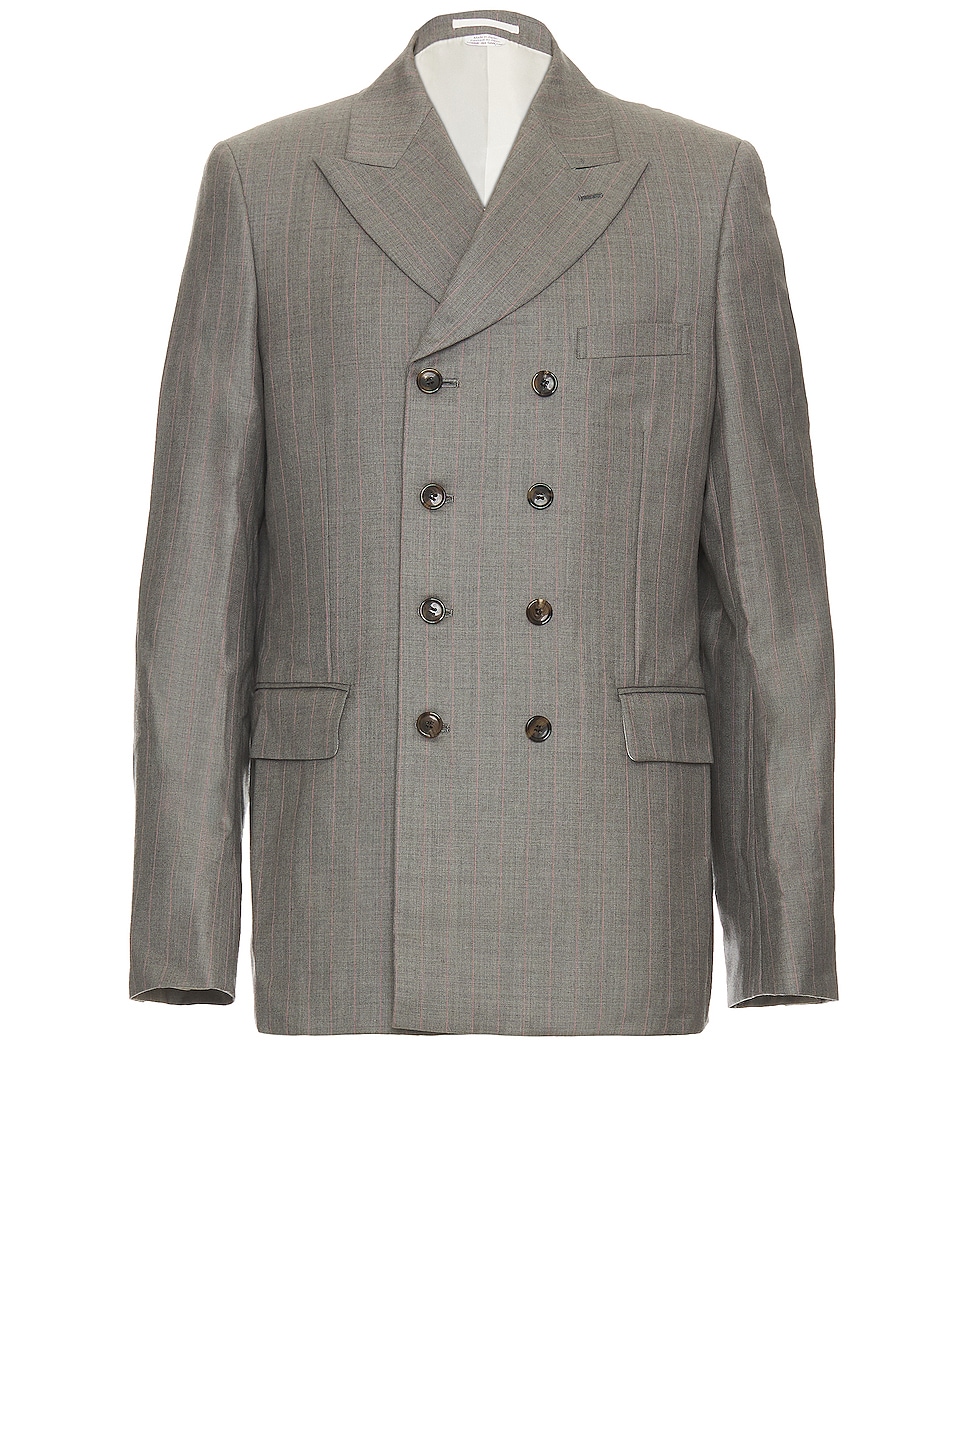 Image 1 of COMME des GARCONS Homme Plus Pencil Striped Double Breasted Blazer in Grey & Pink